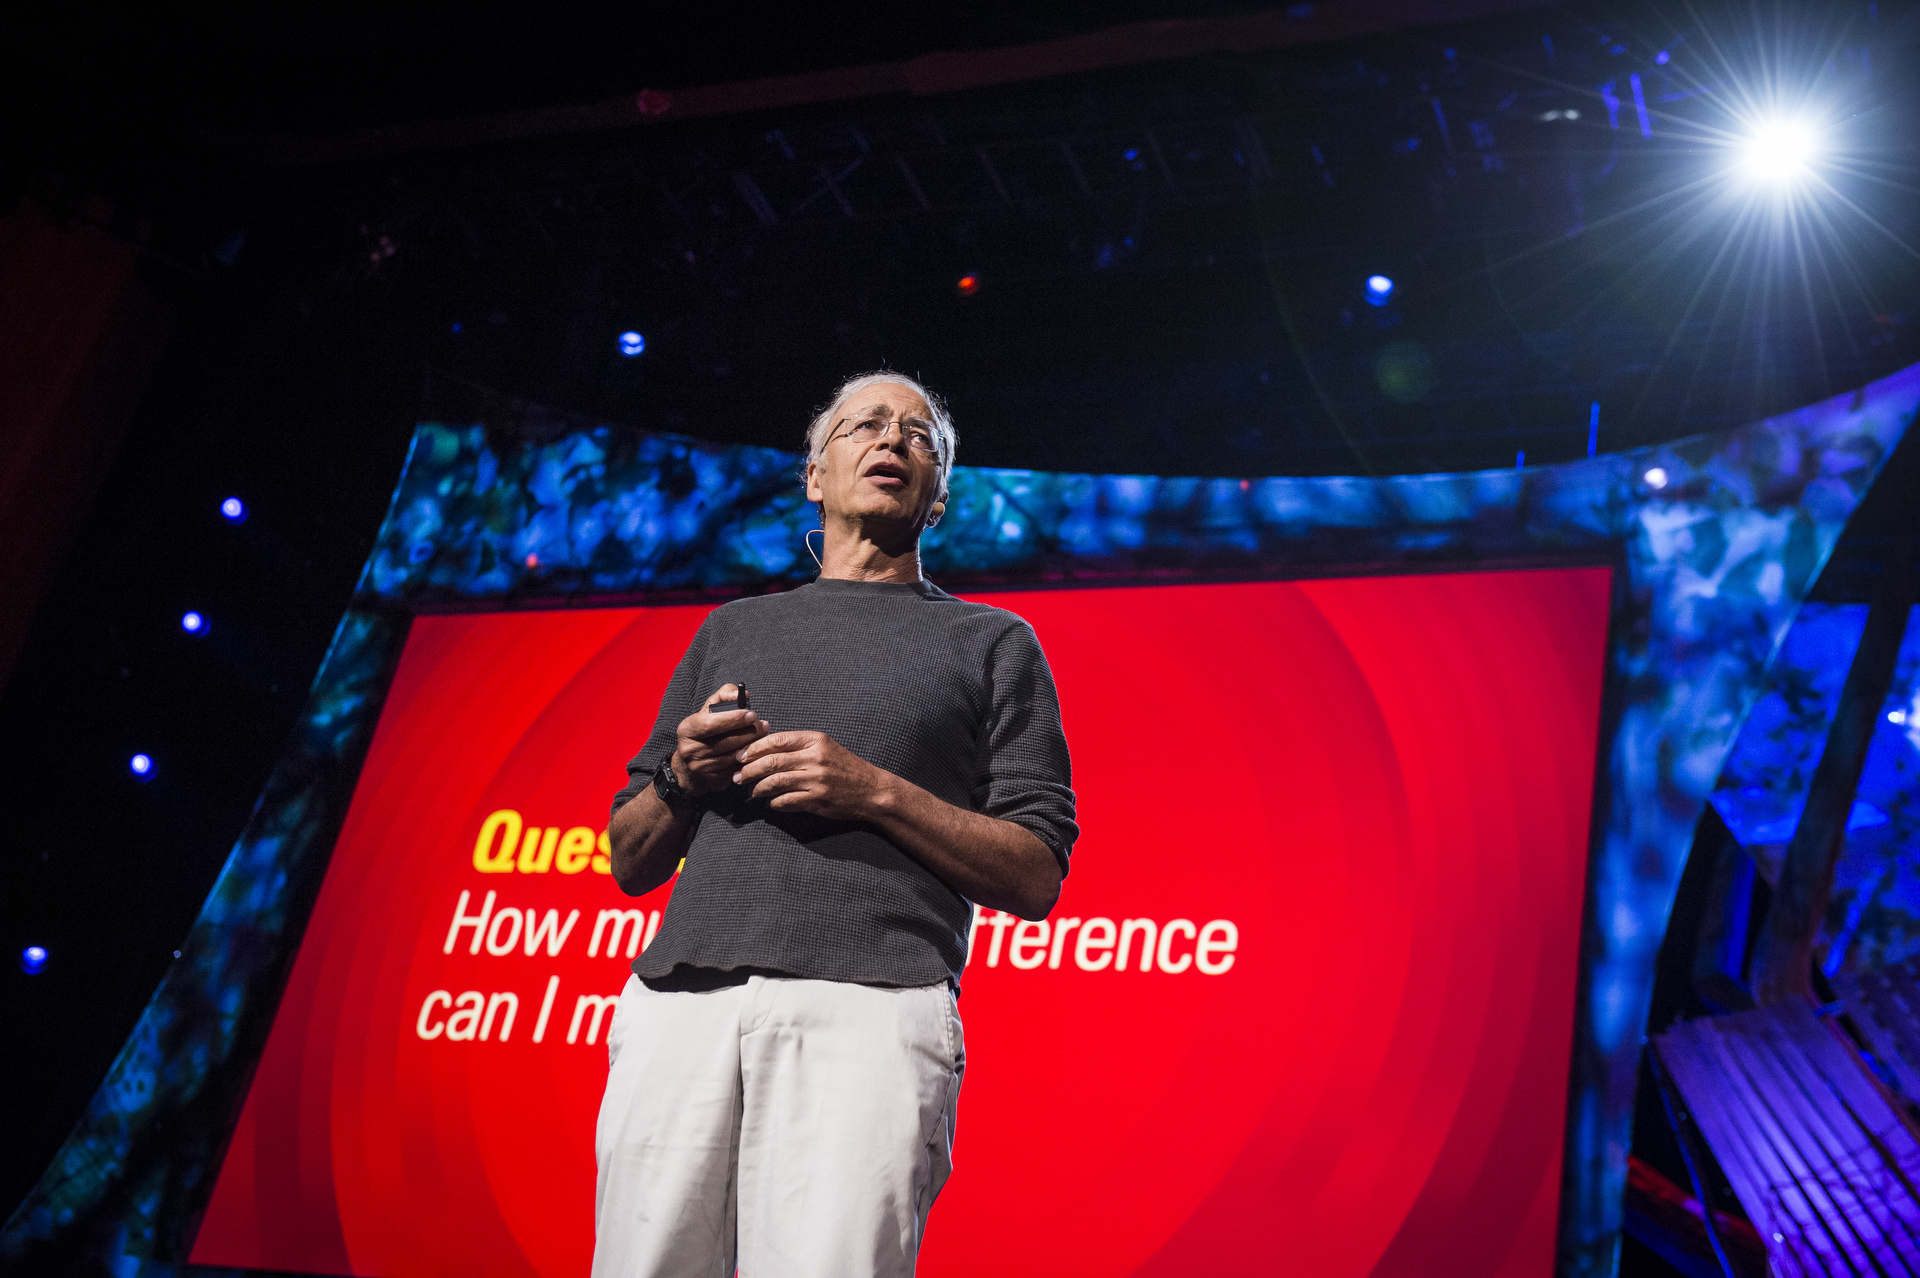 Peter Singer, philosopher and ethicist, speaking at TED2013 in California.